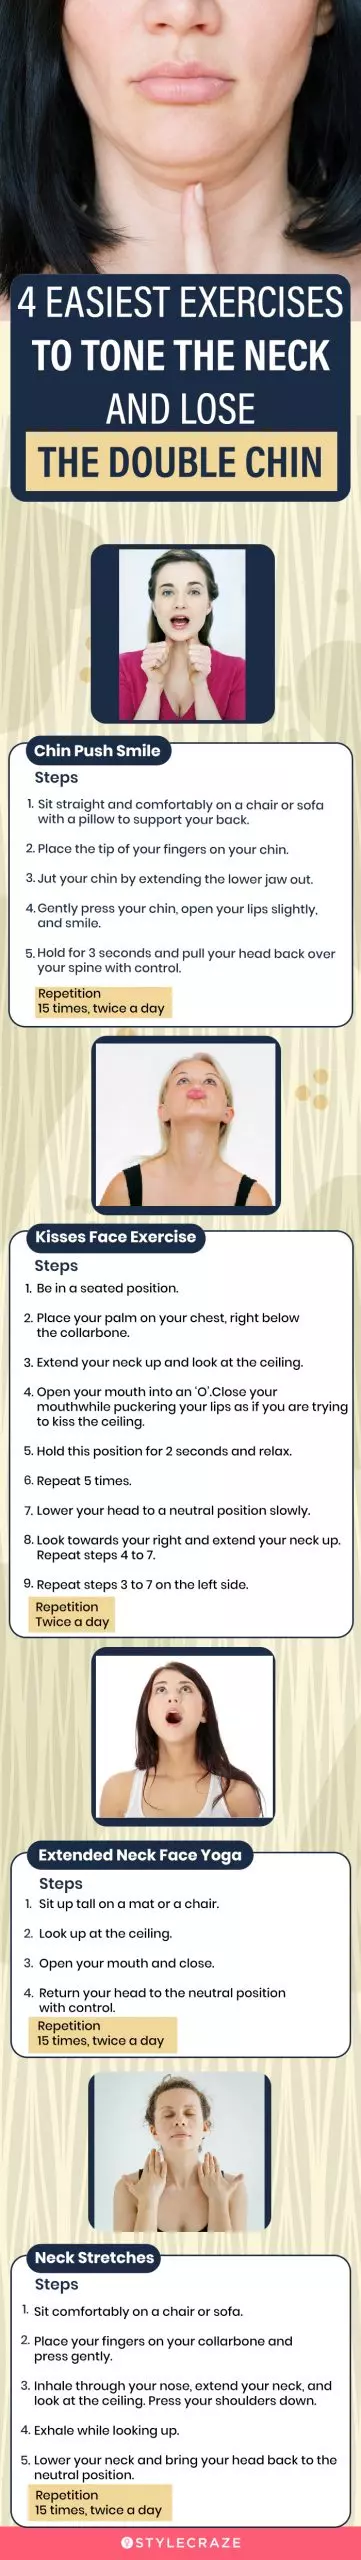 4 easiest exercises to tone the neck and lose the double chin (infographic)